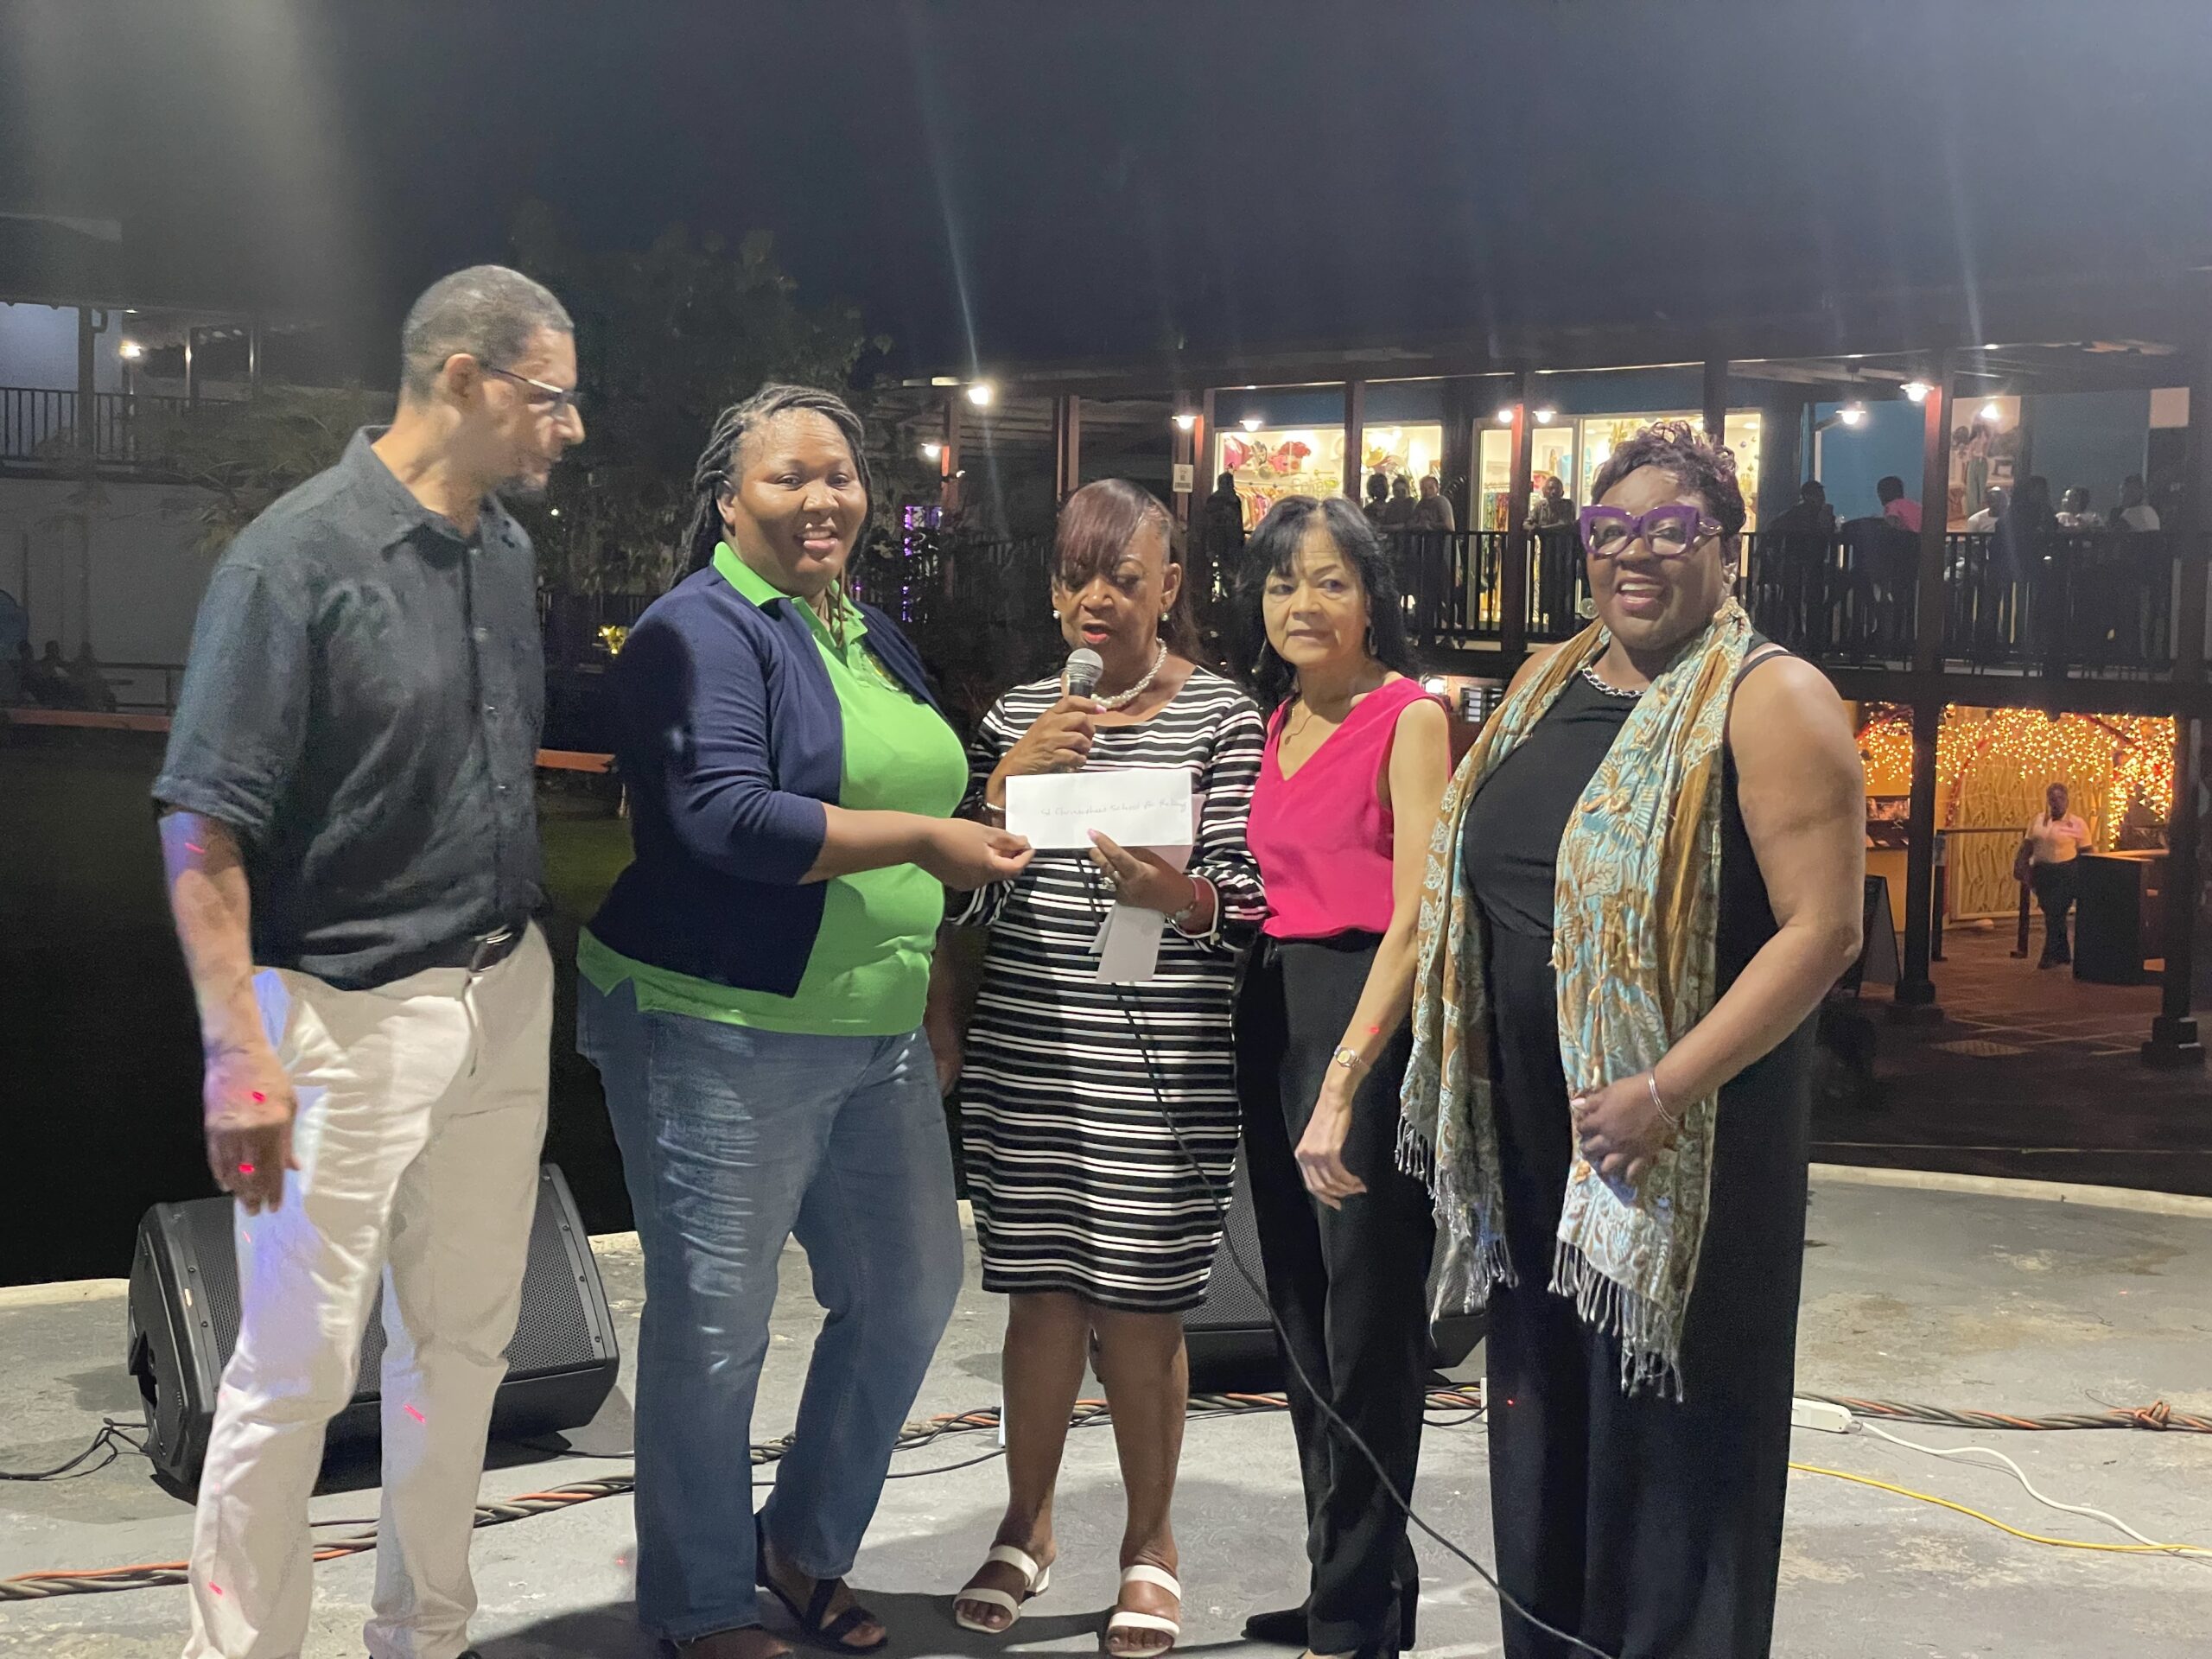 L-r: Councillor Ian Isaacs, representing the Mayor; Lavern Stewart Barnett - Acting Principal, St Christopher School for the Deaf; Vana Taylor - JHTA Ocho Rios Area Chair; Camille Needham - JHTA Executive Director;  Claudile Sydial, representing the Custos Rotulorum of the Parish of St Ann